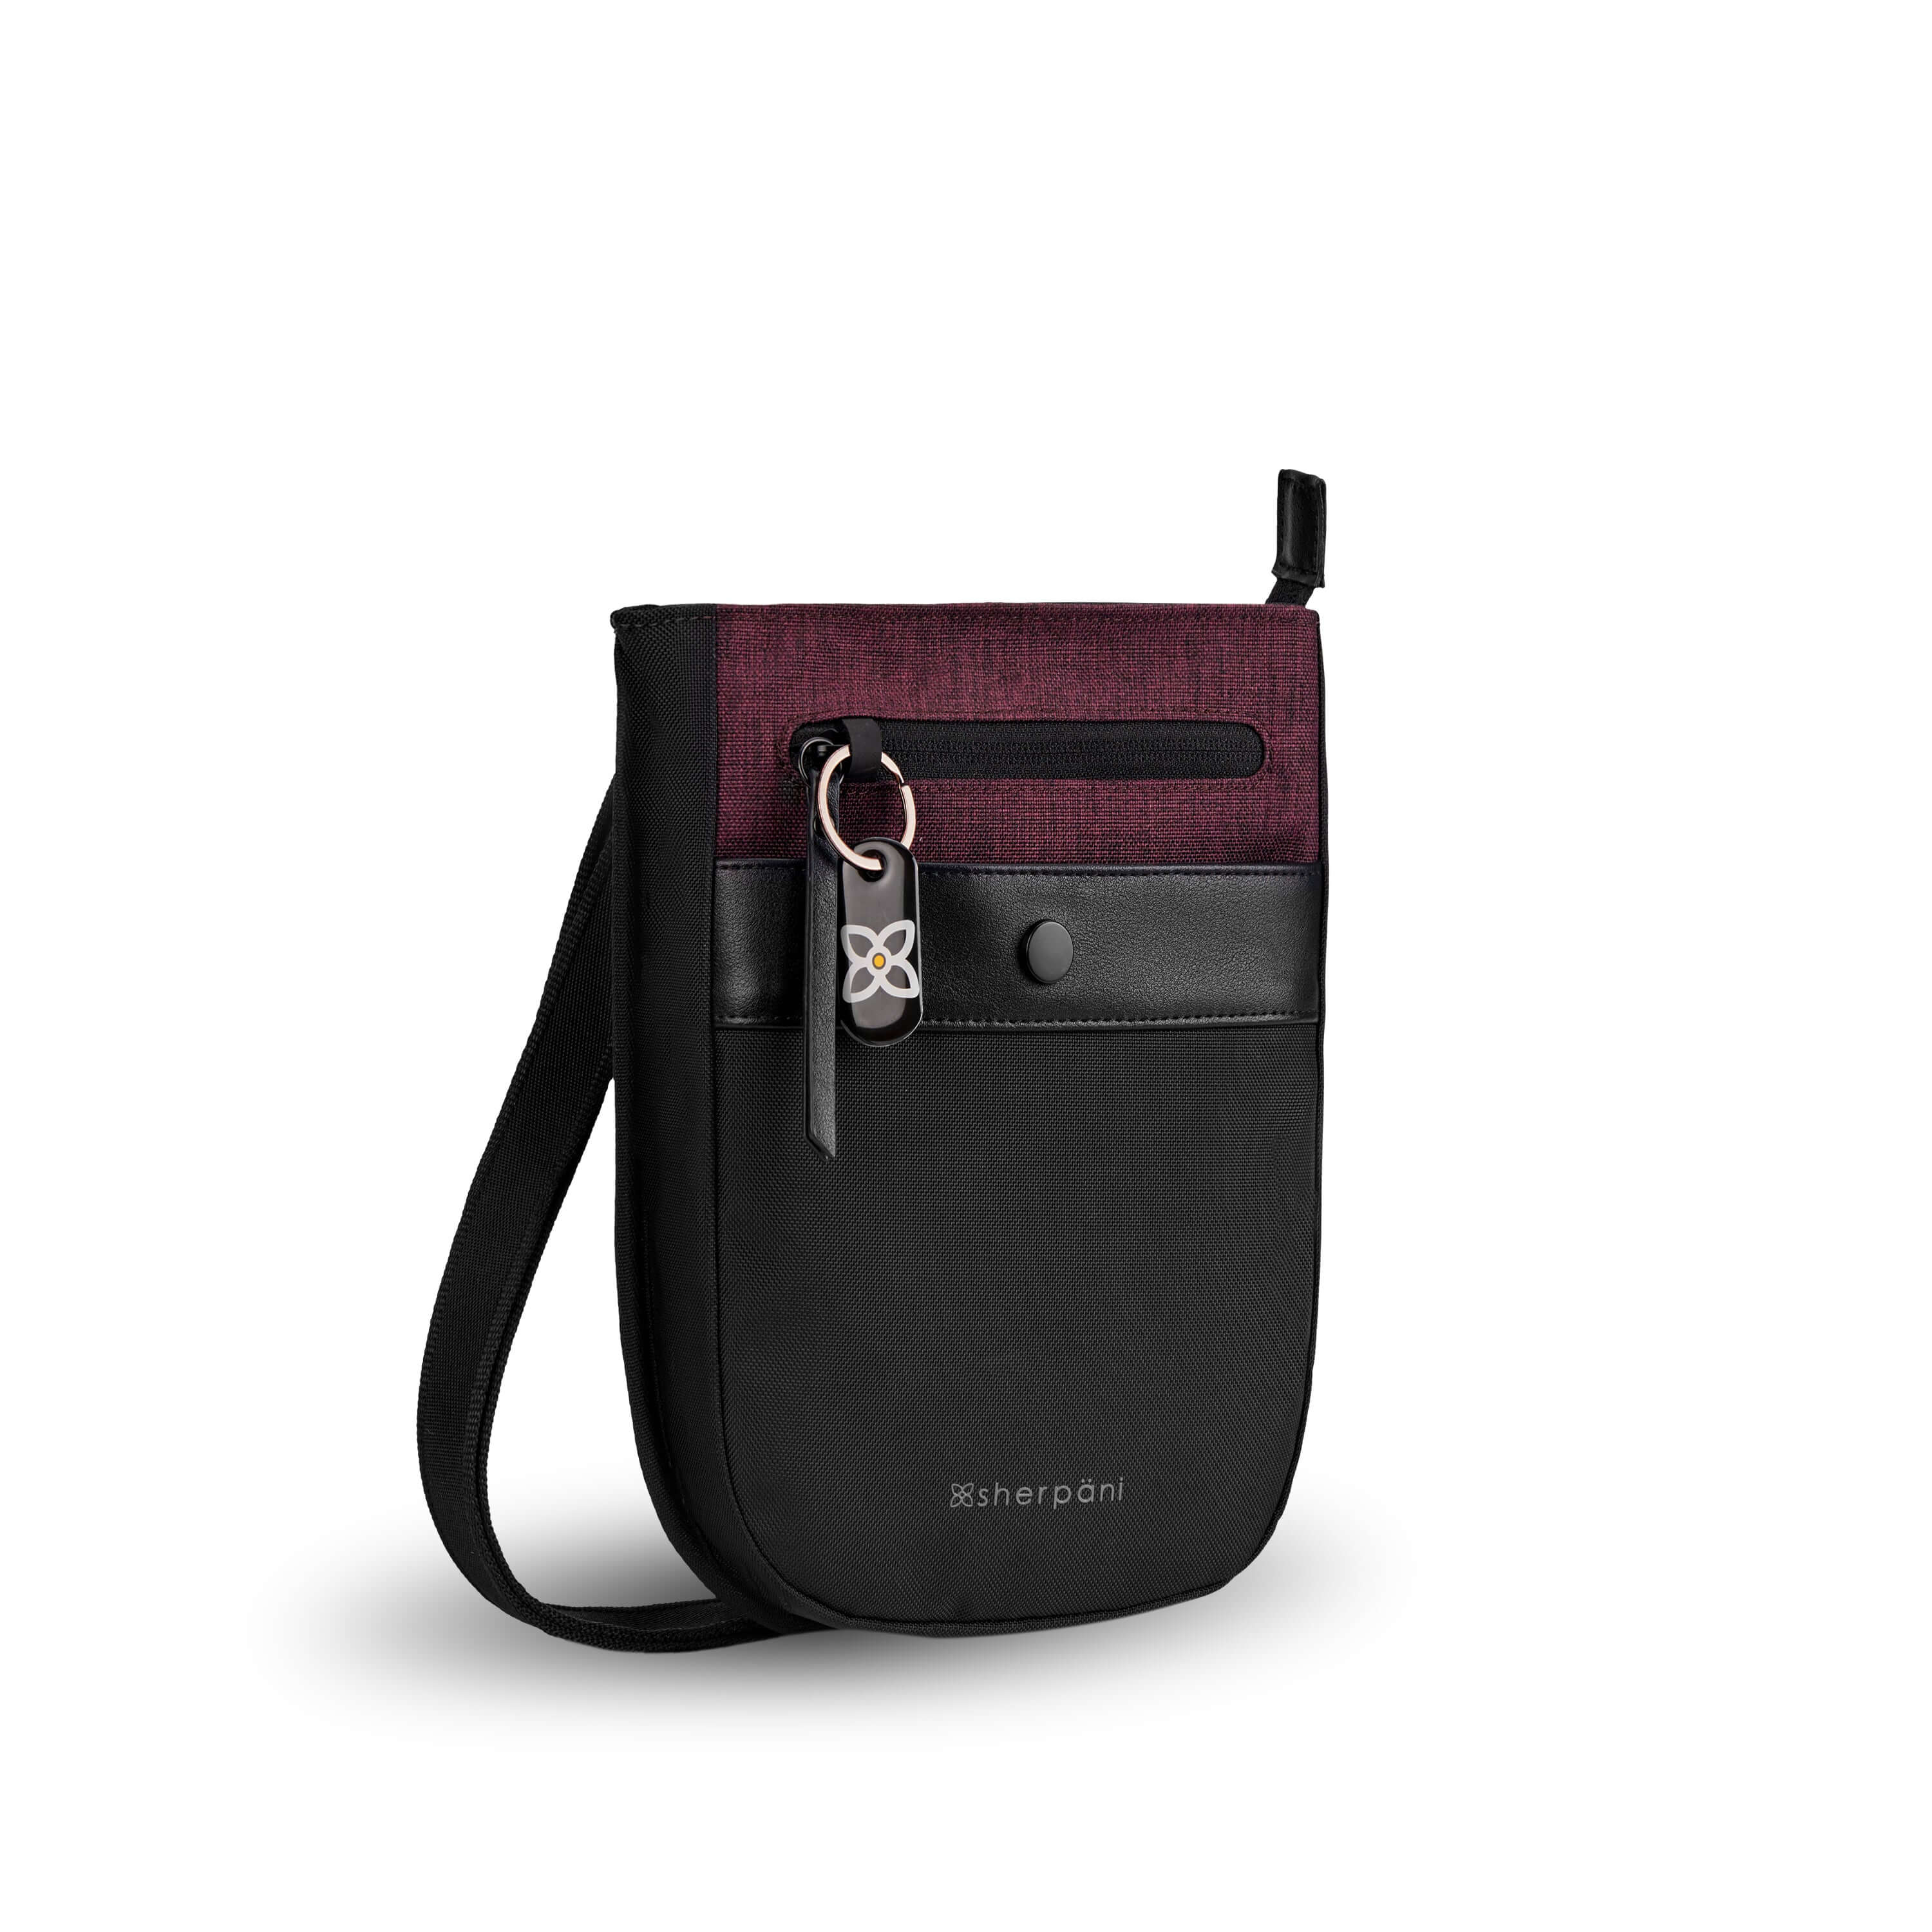 Angled front view of Sherpani’s Anti-Theft bag, the Prima AT in Merlot, with vegan leather accents in black. There is an external pouch on the front of the bag that sits below a locking zipper compartment, which has a ReturnMe tag clipped to it. The bag features an adjustable crossbody strap.